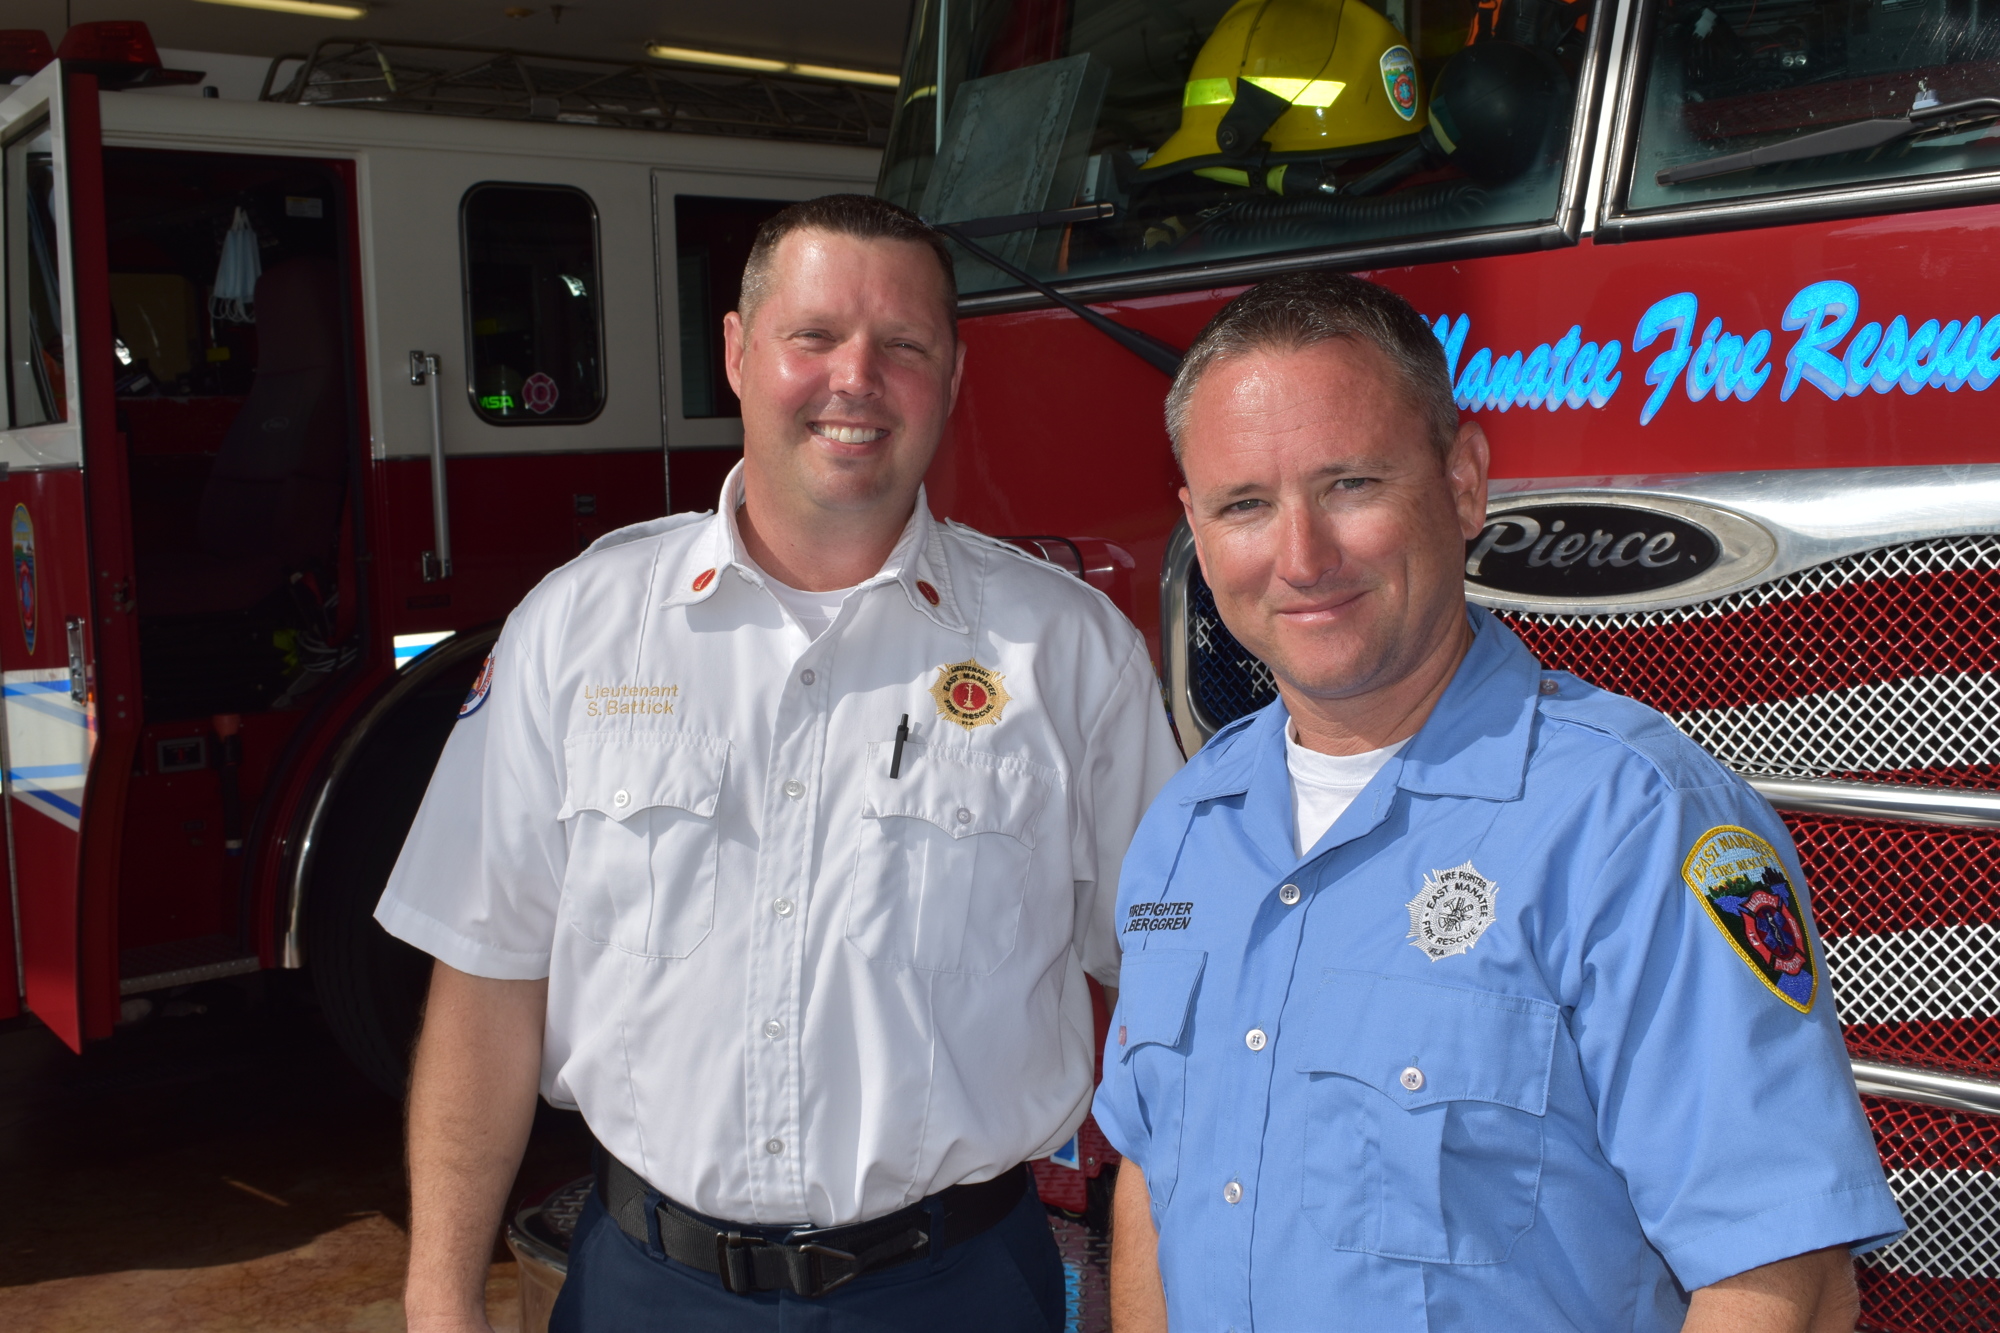 Lieutenant Shawn Battick and Firefighter Ryan Berggren are the winners of the Fire Officer of the Year and Firefighter of the Year awards.